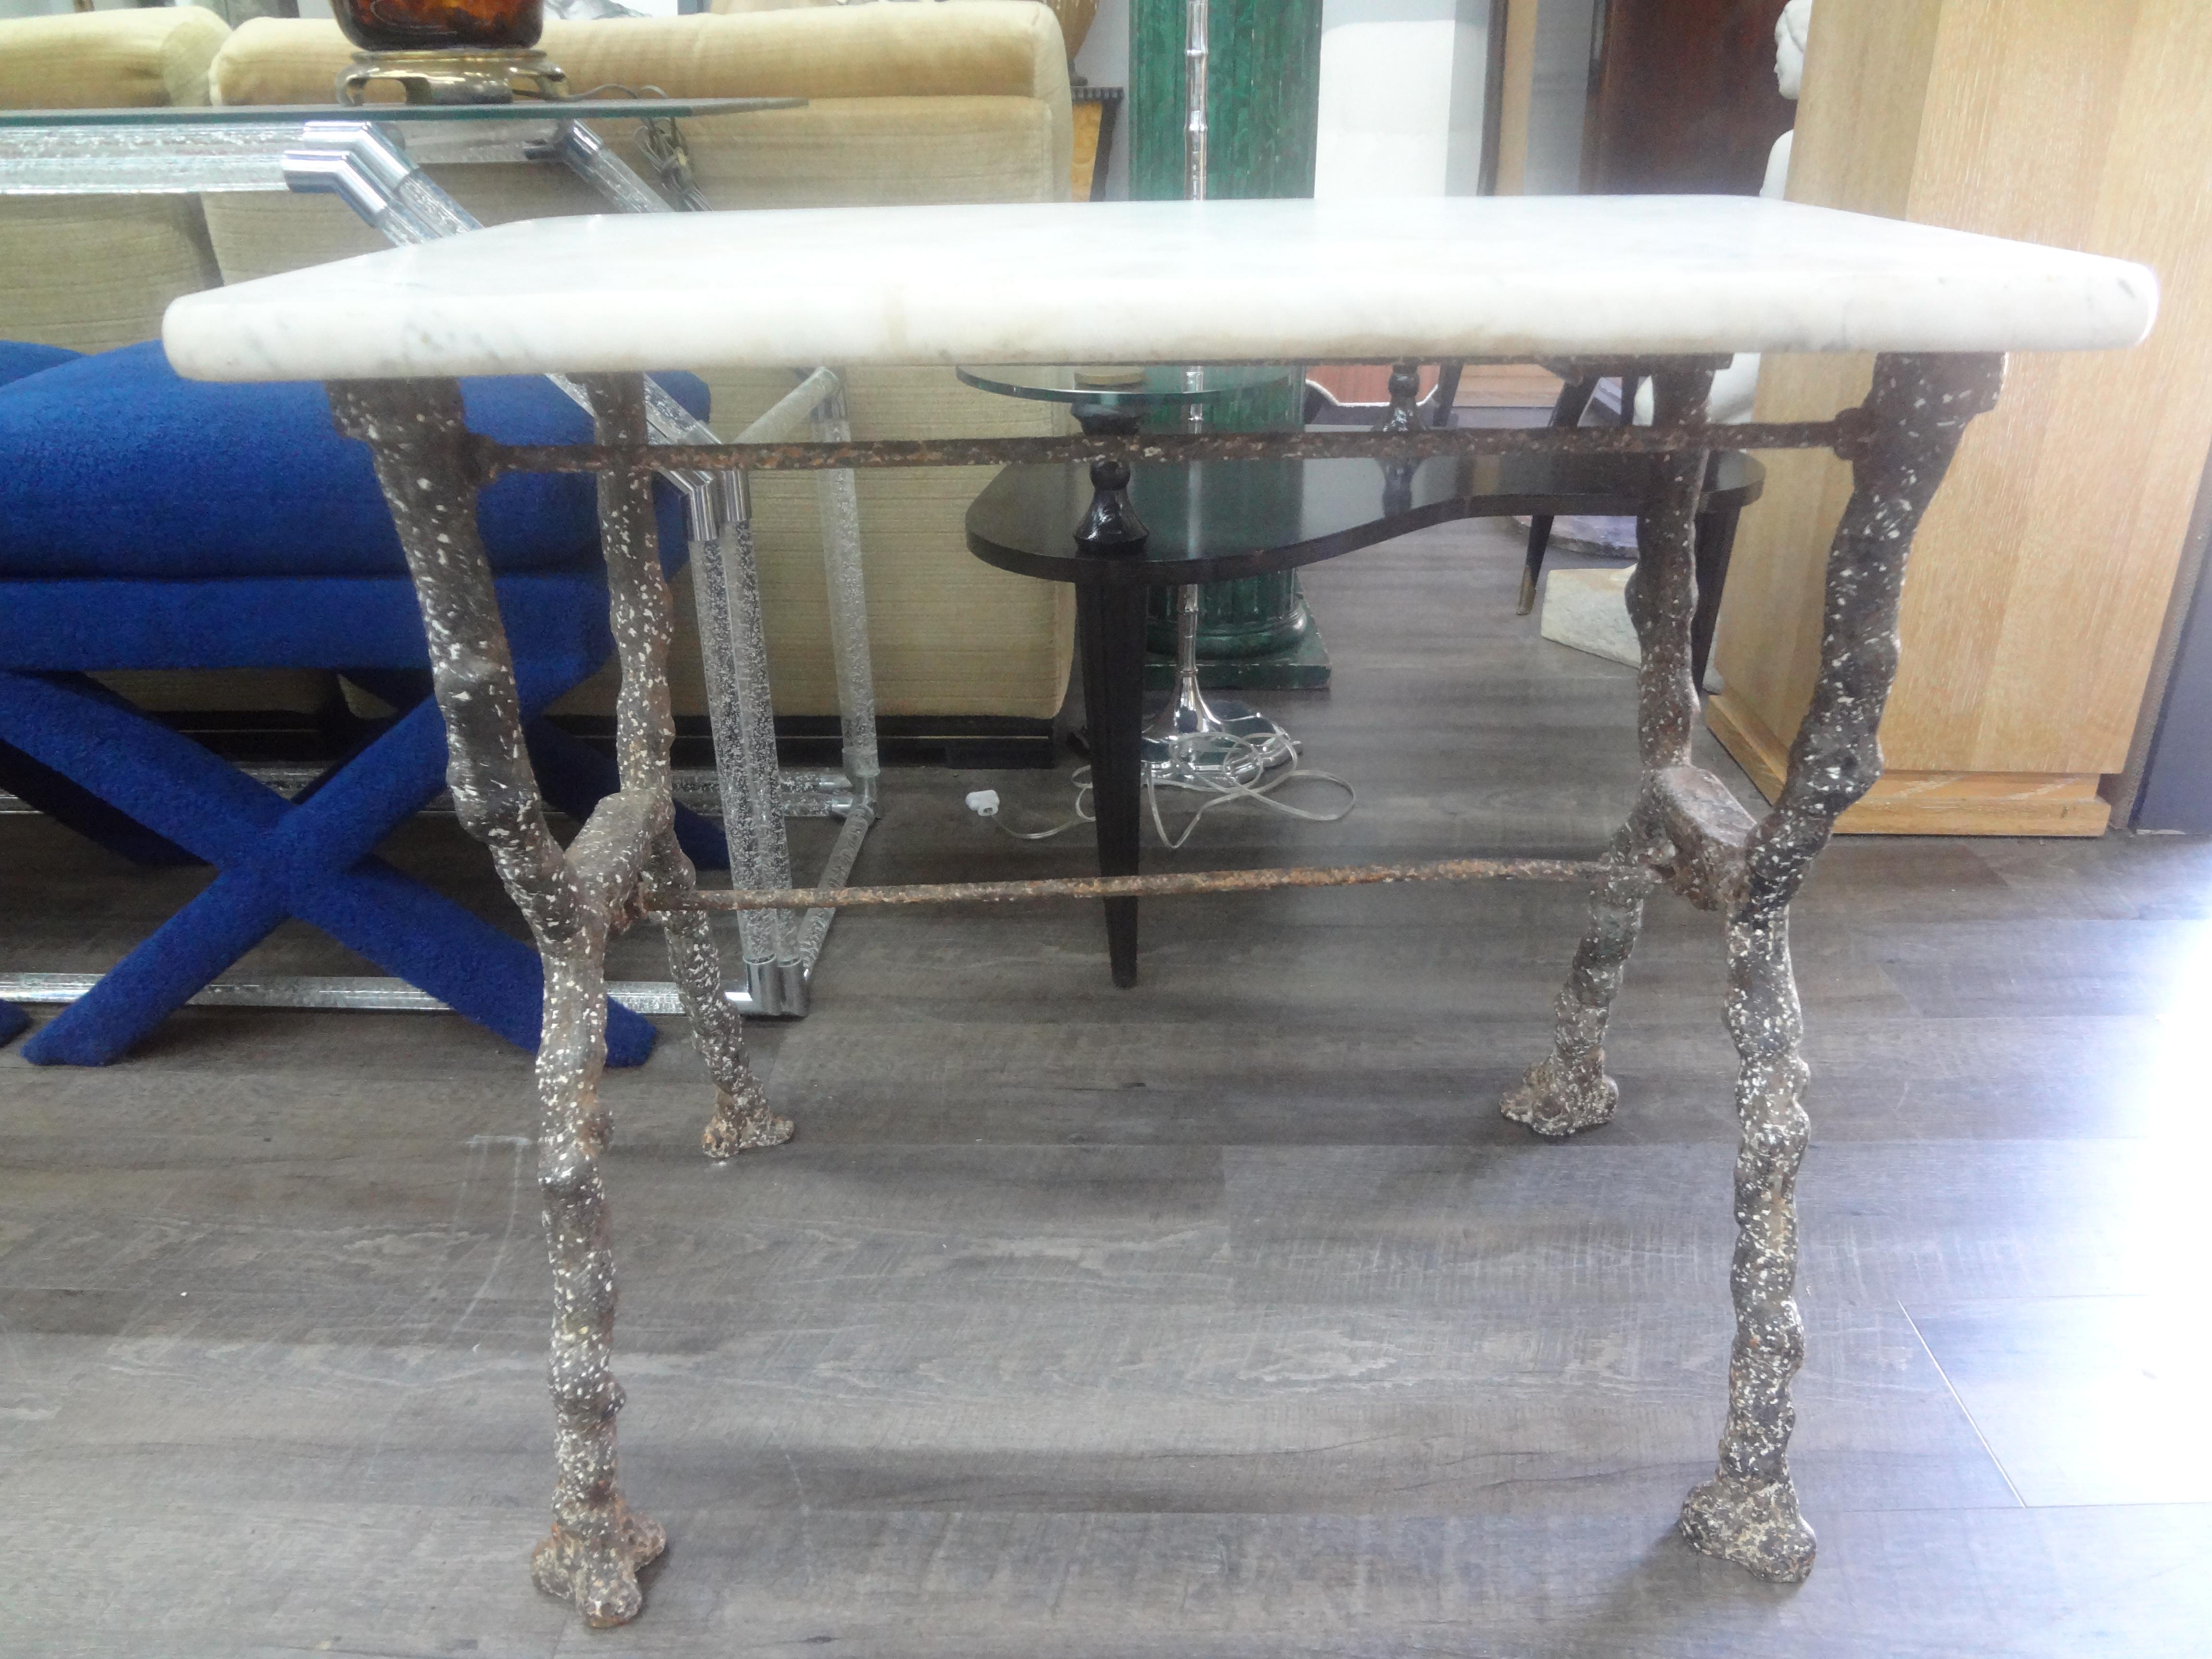 Rare 19th Century French Iron Garden Table With Marble Top By Arras.
Stunning 19th century French iron garden table or bistro table which has been cast to look like tree branches with the original marble top. This lovely table which can be used